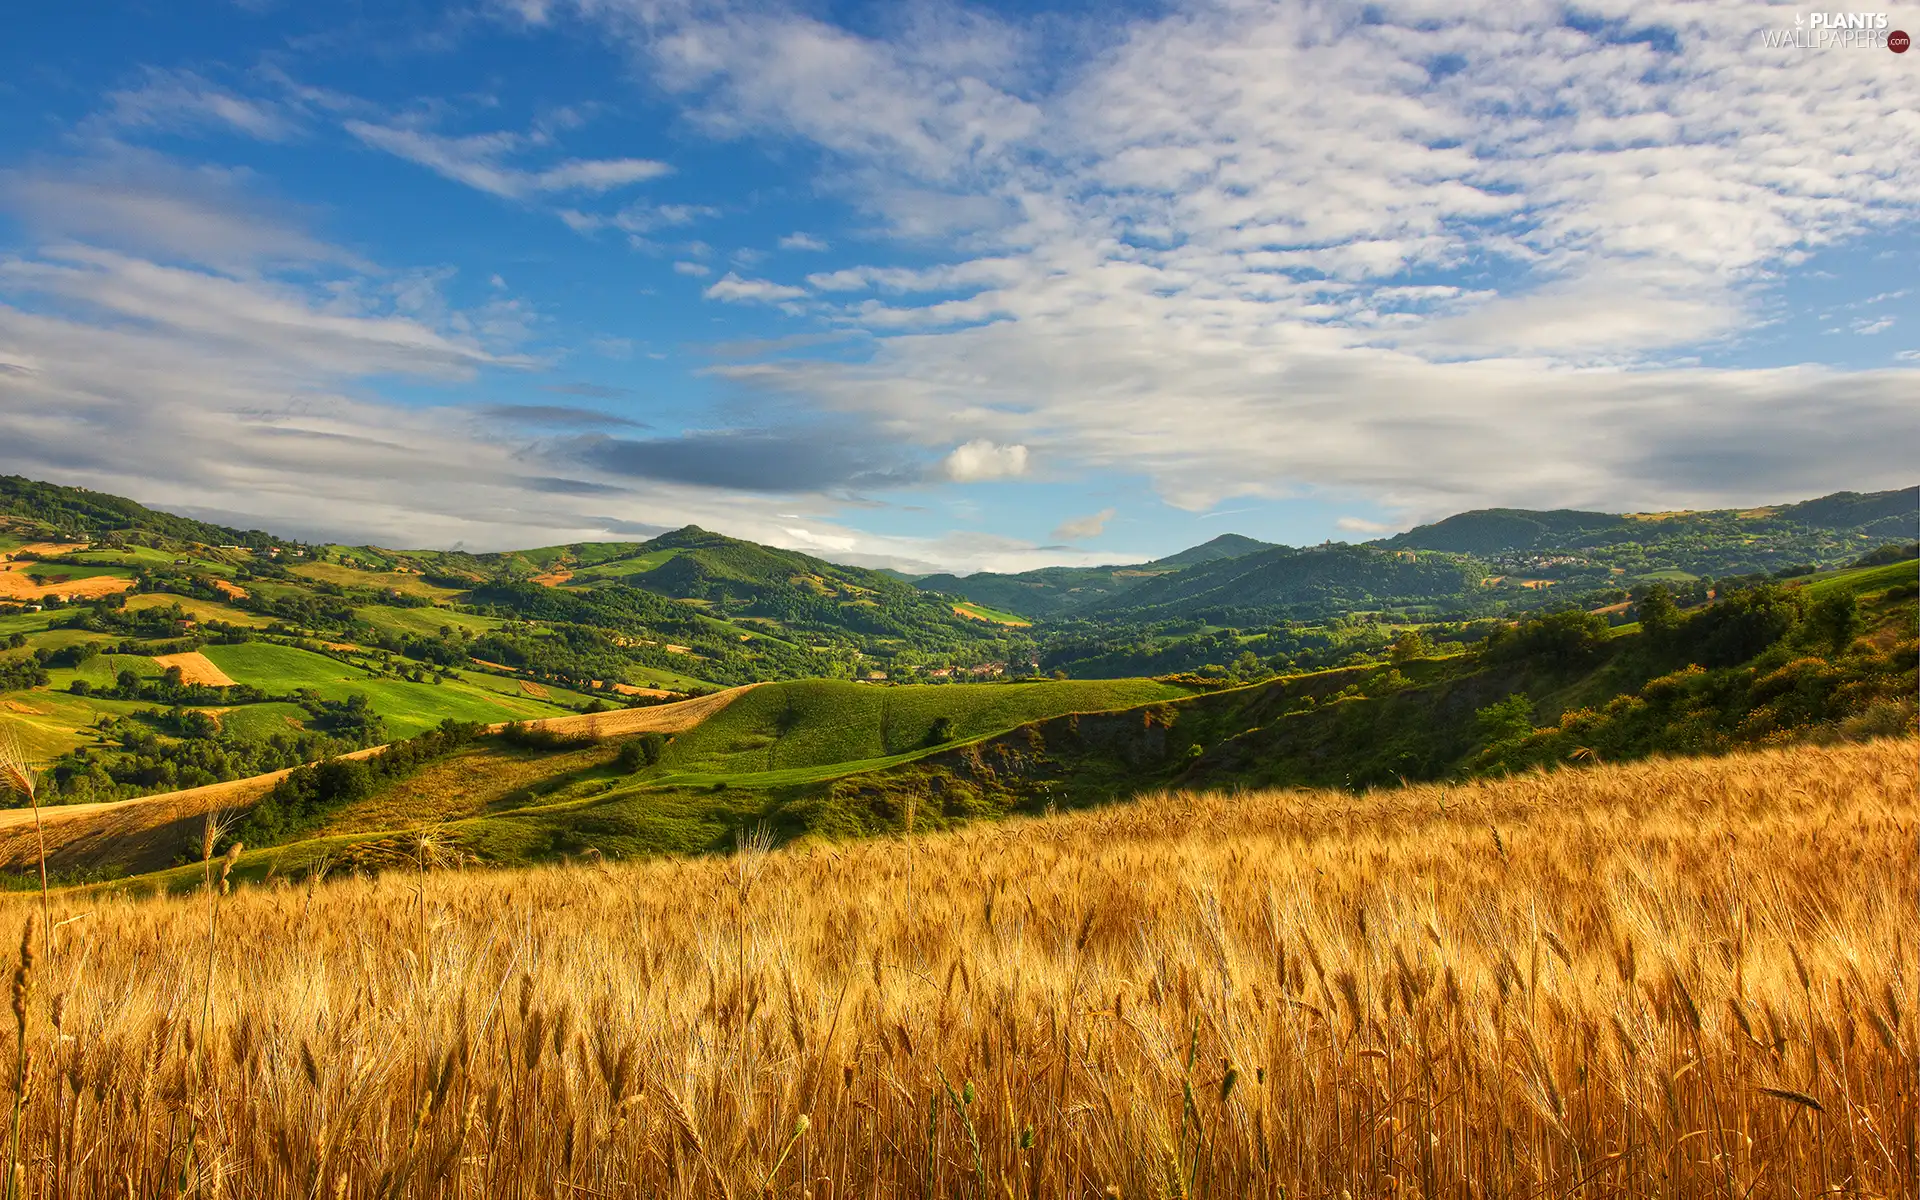 The Hills, corn, viewes, wheat, Field, trees, clouds